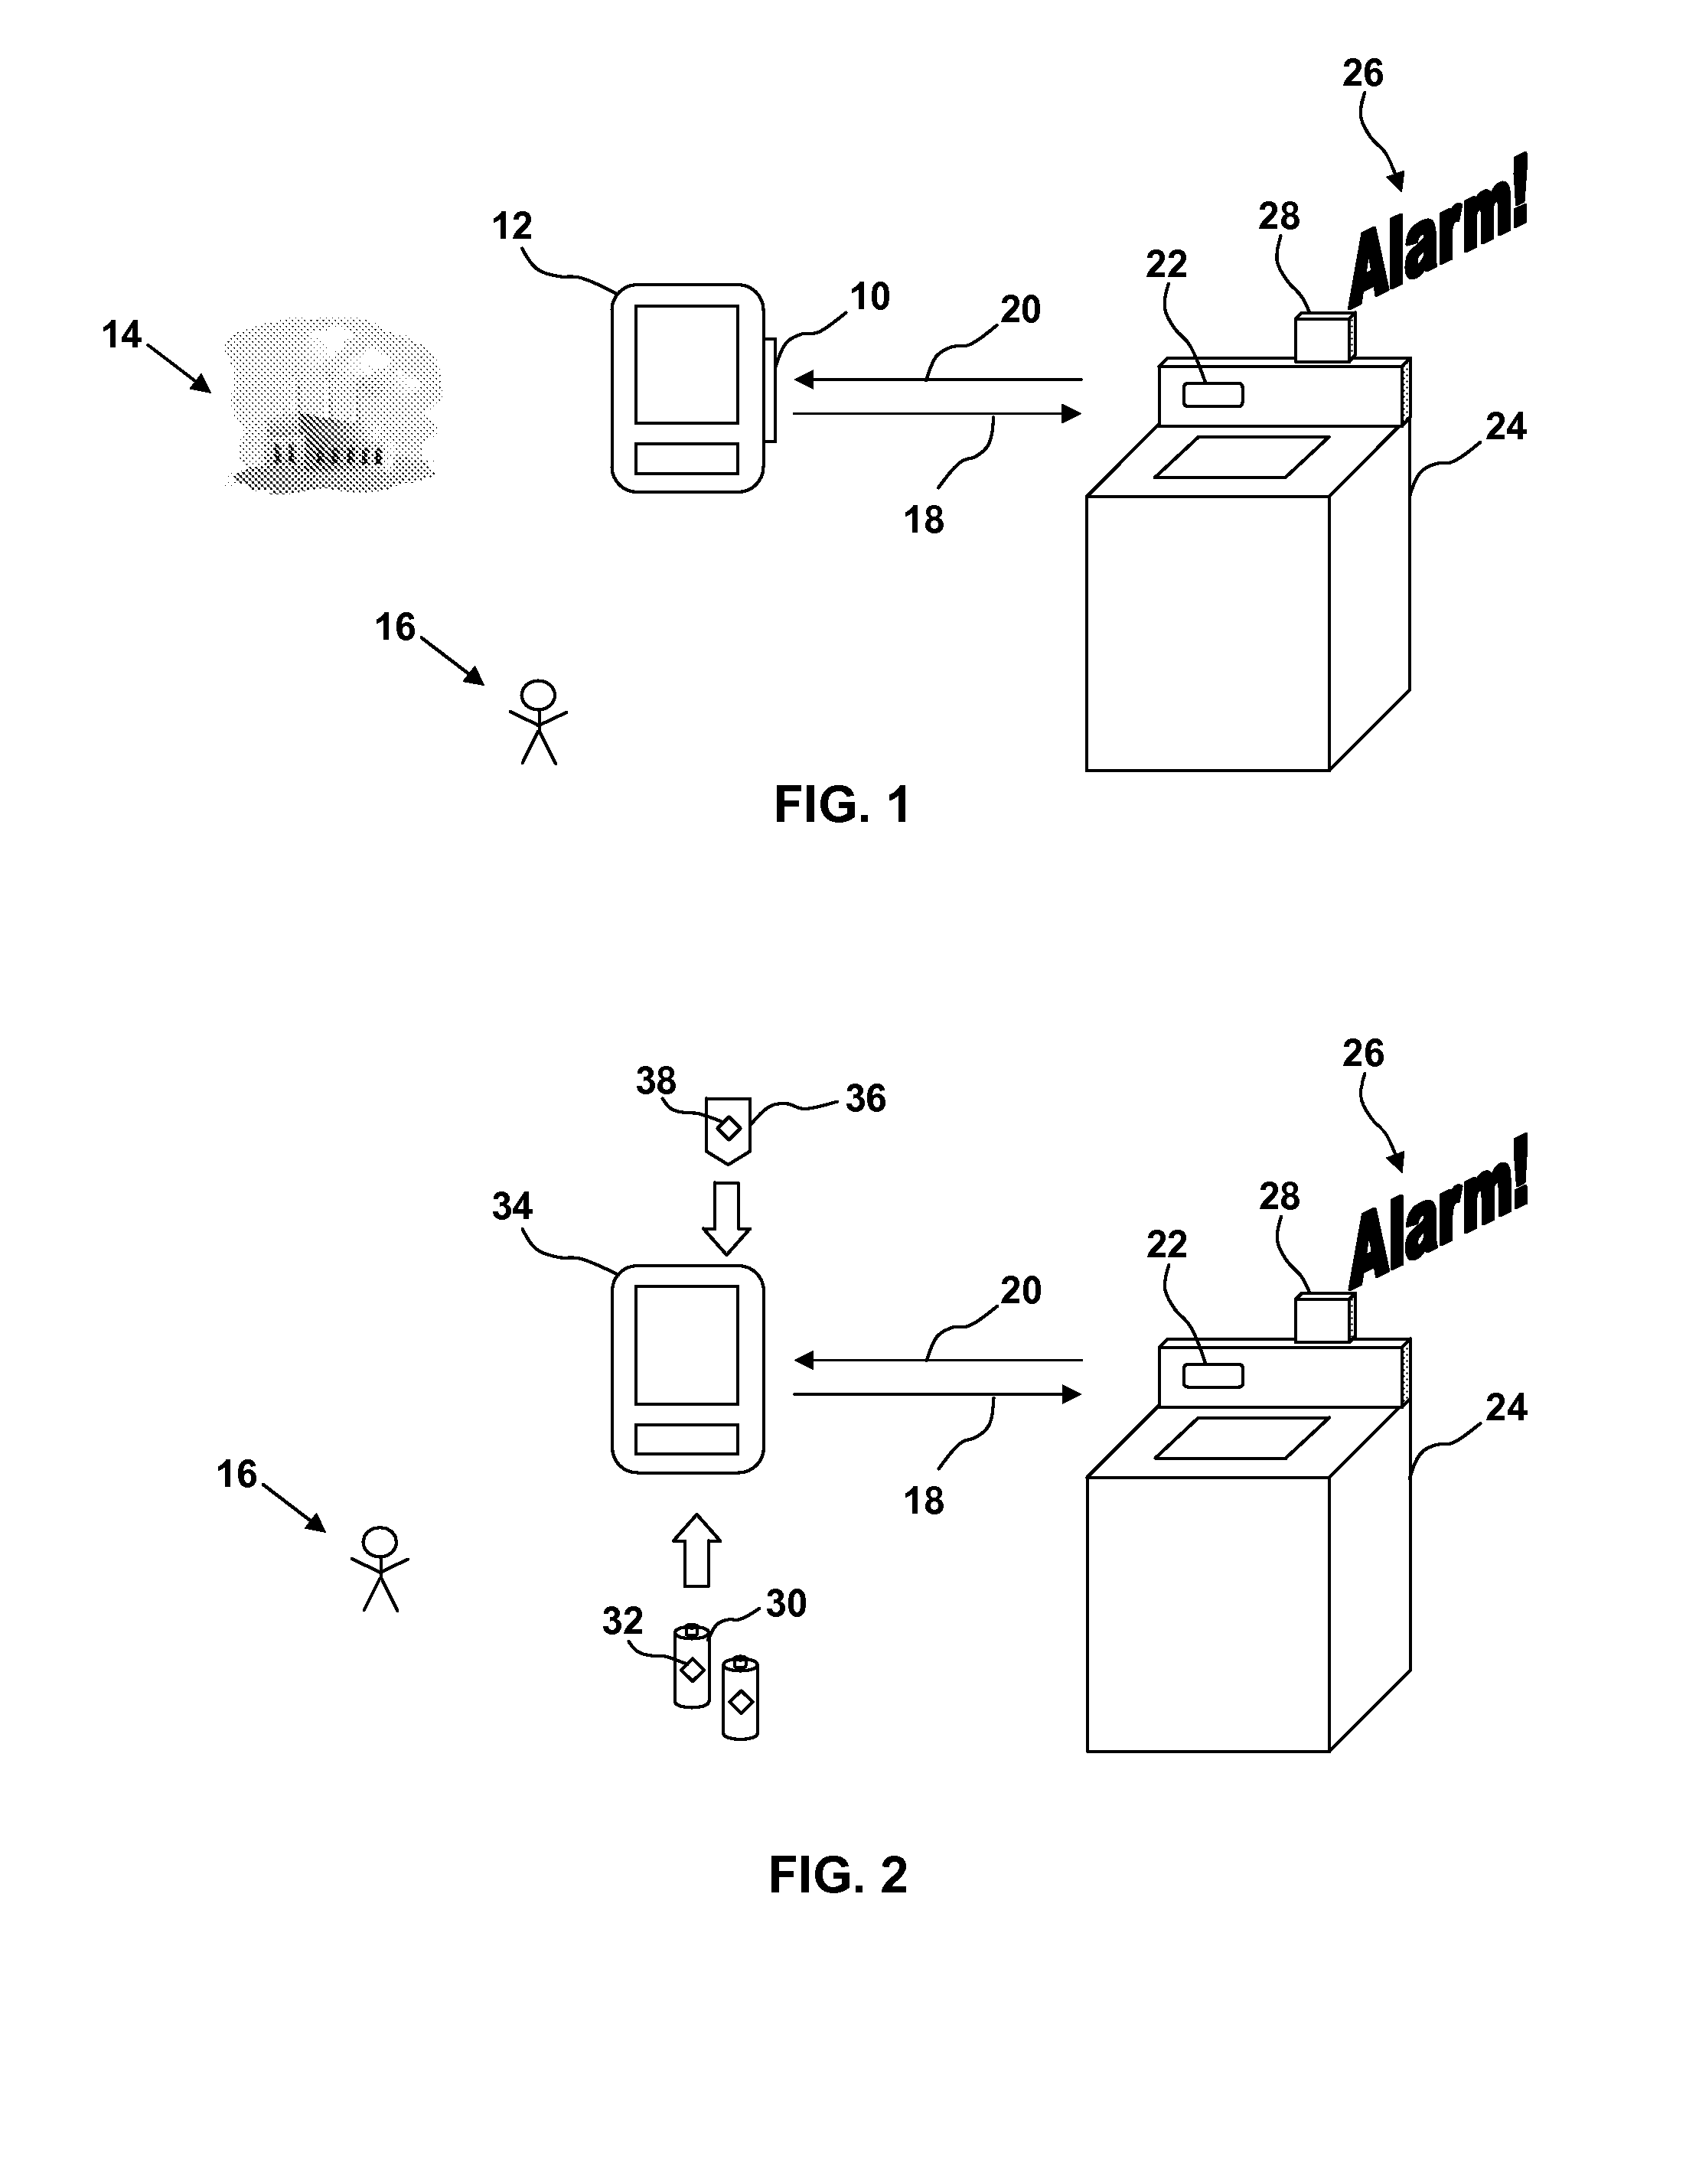 Method and apparatus for preventing water damage to articles